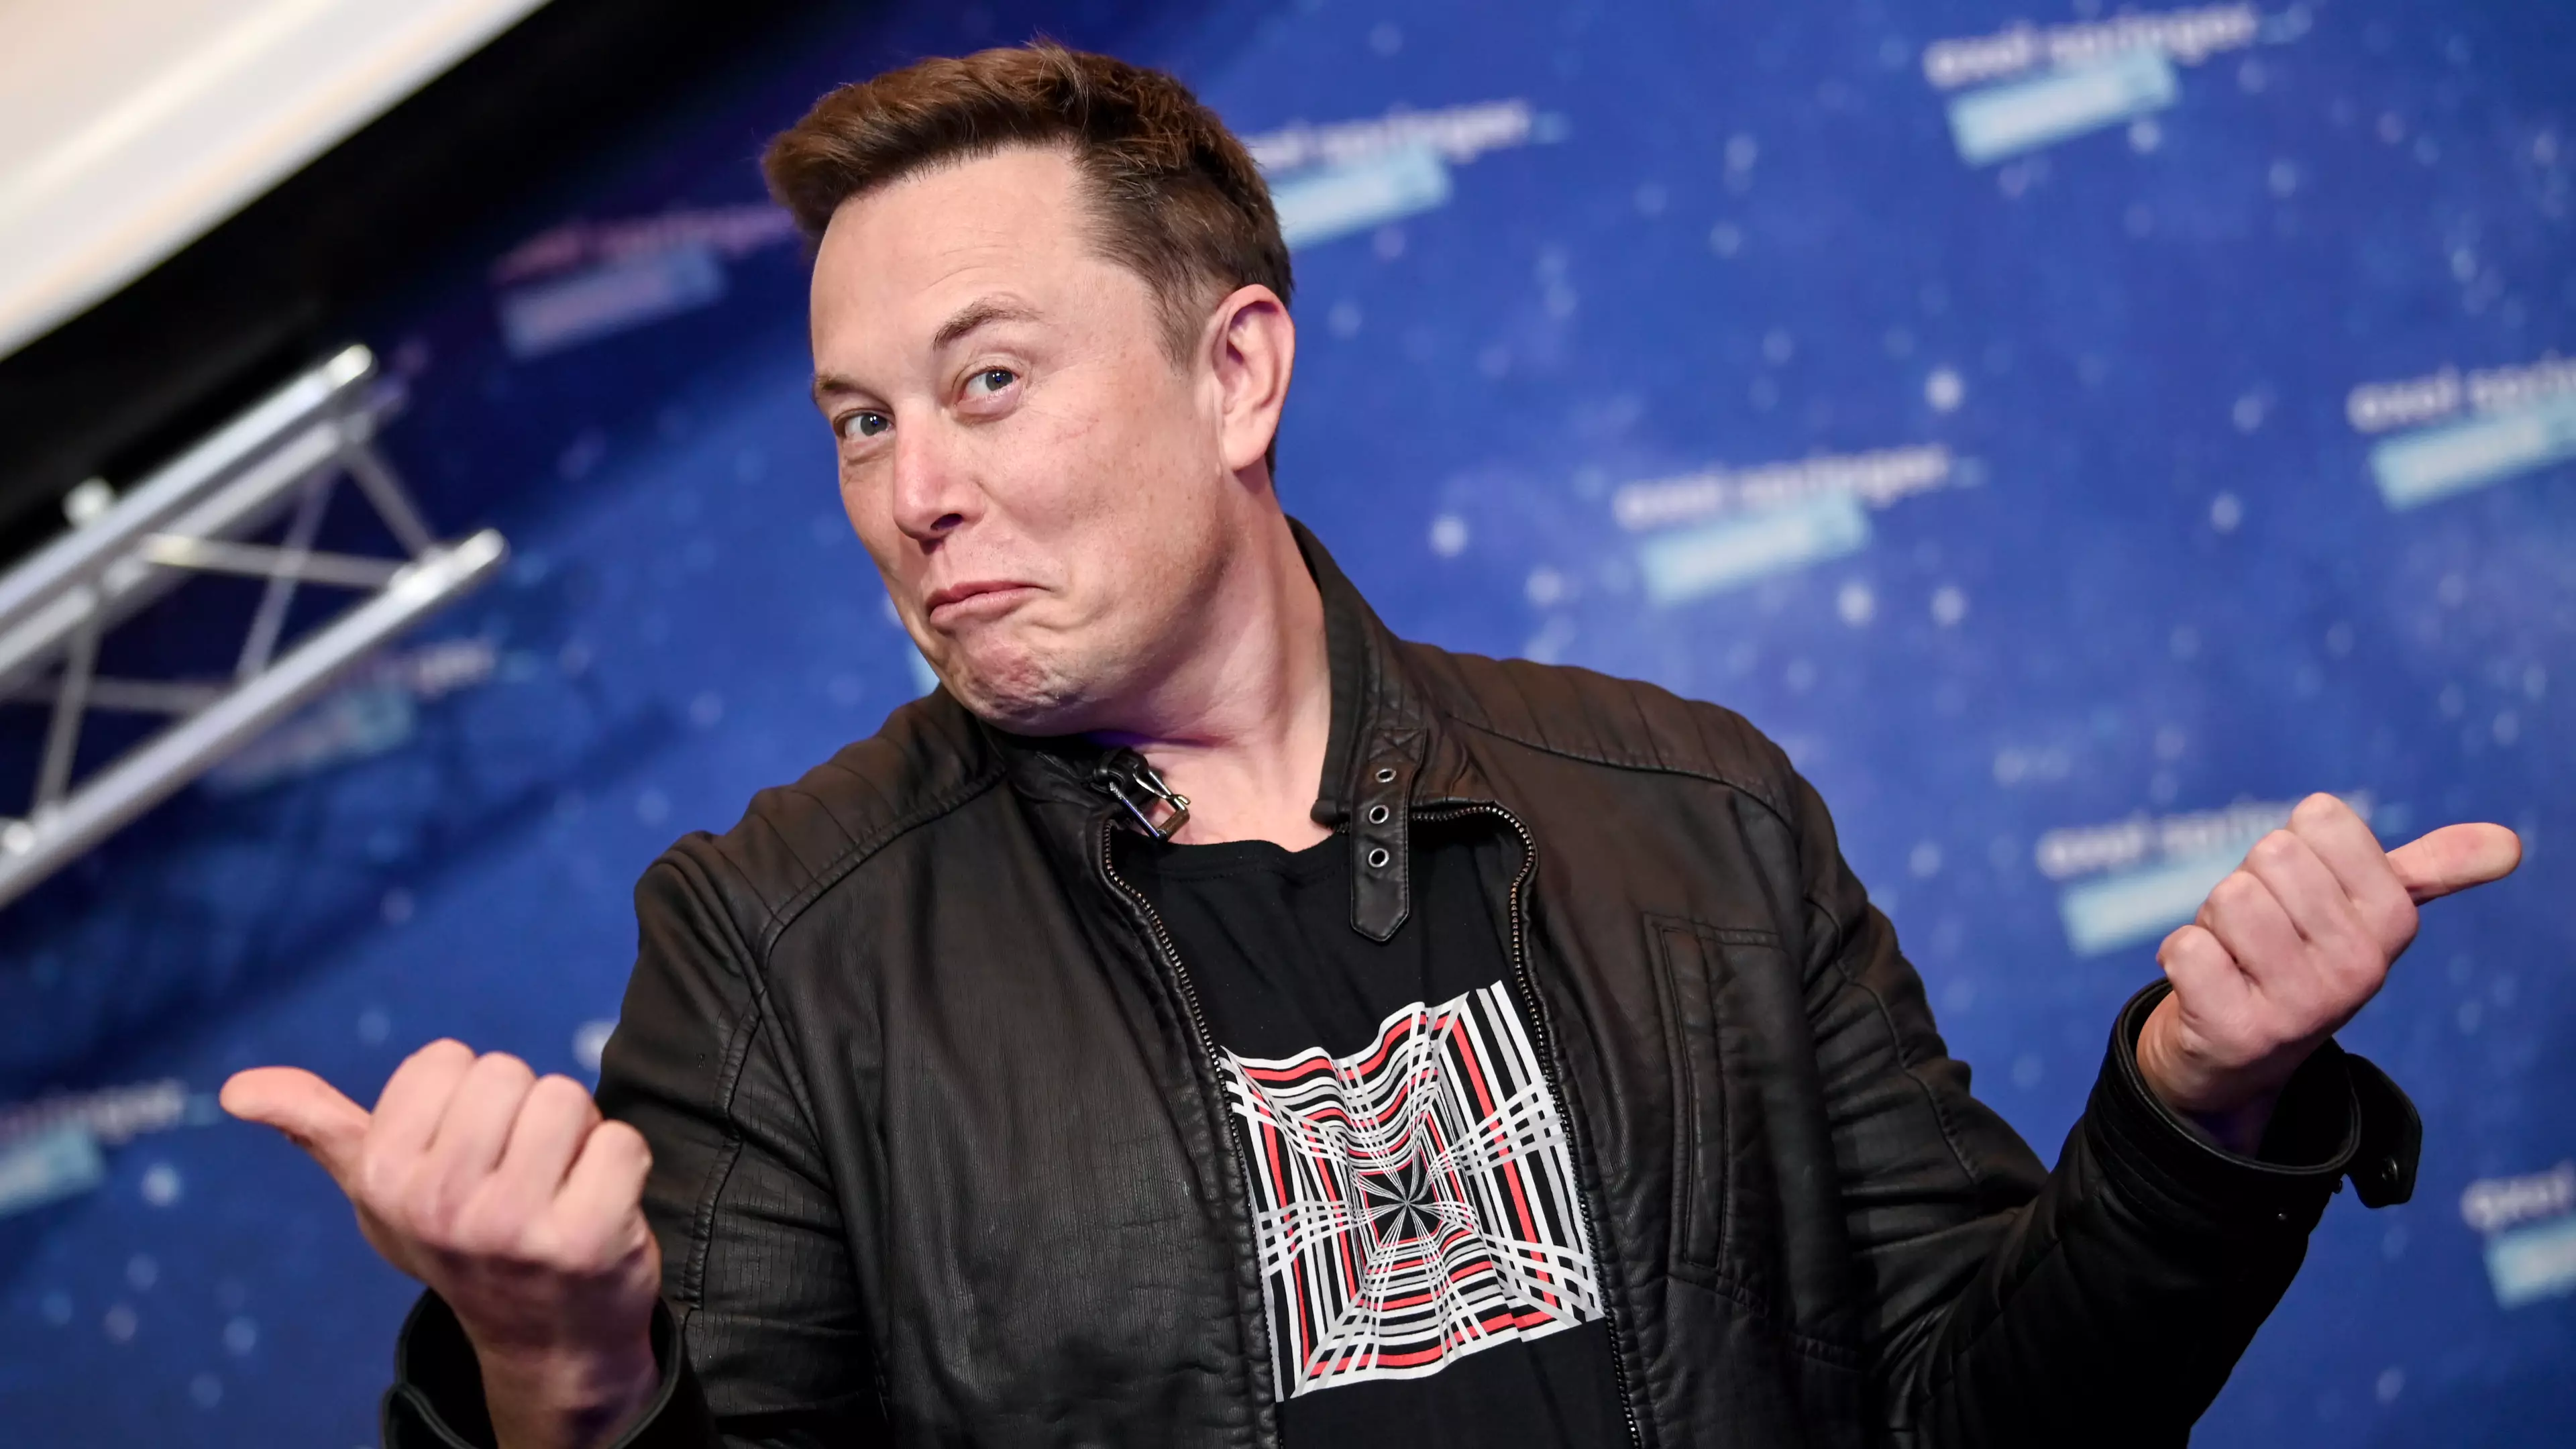 Elon Musk Asks For Advice On How To Donate Money